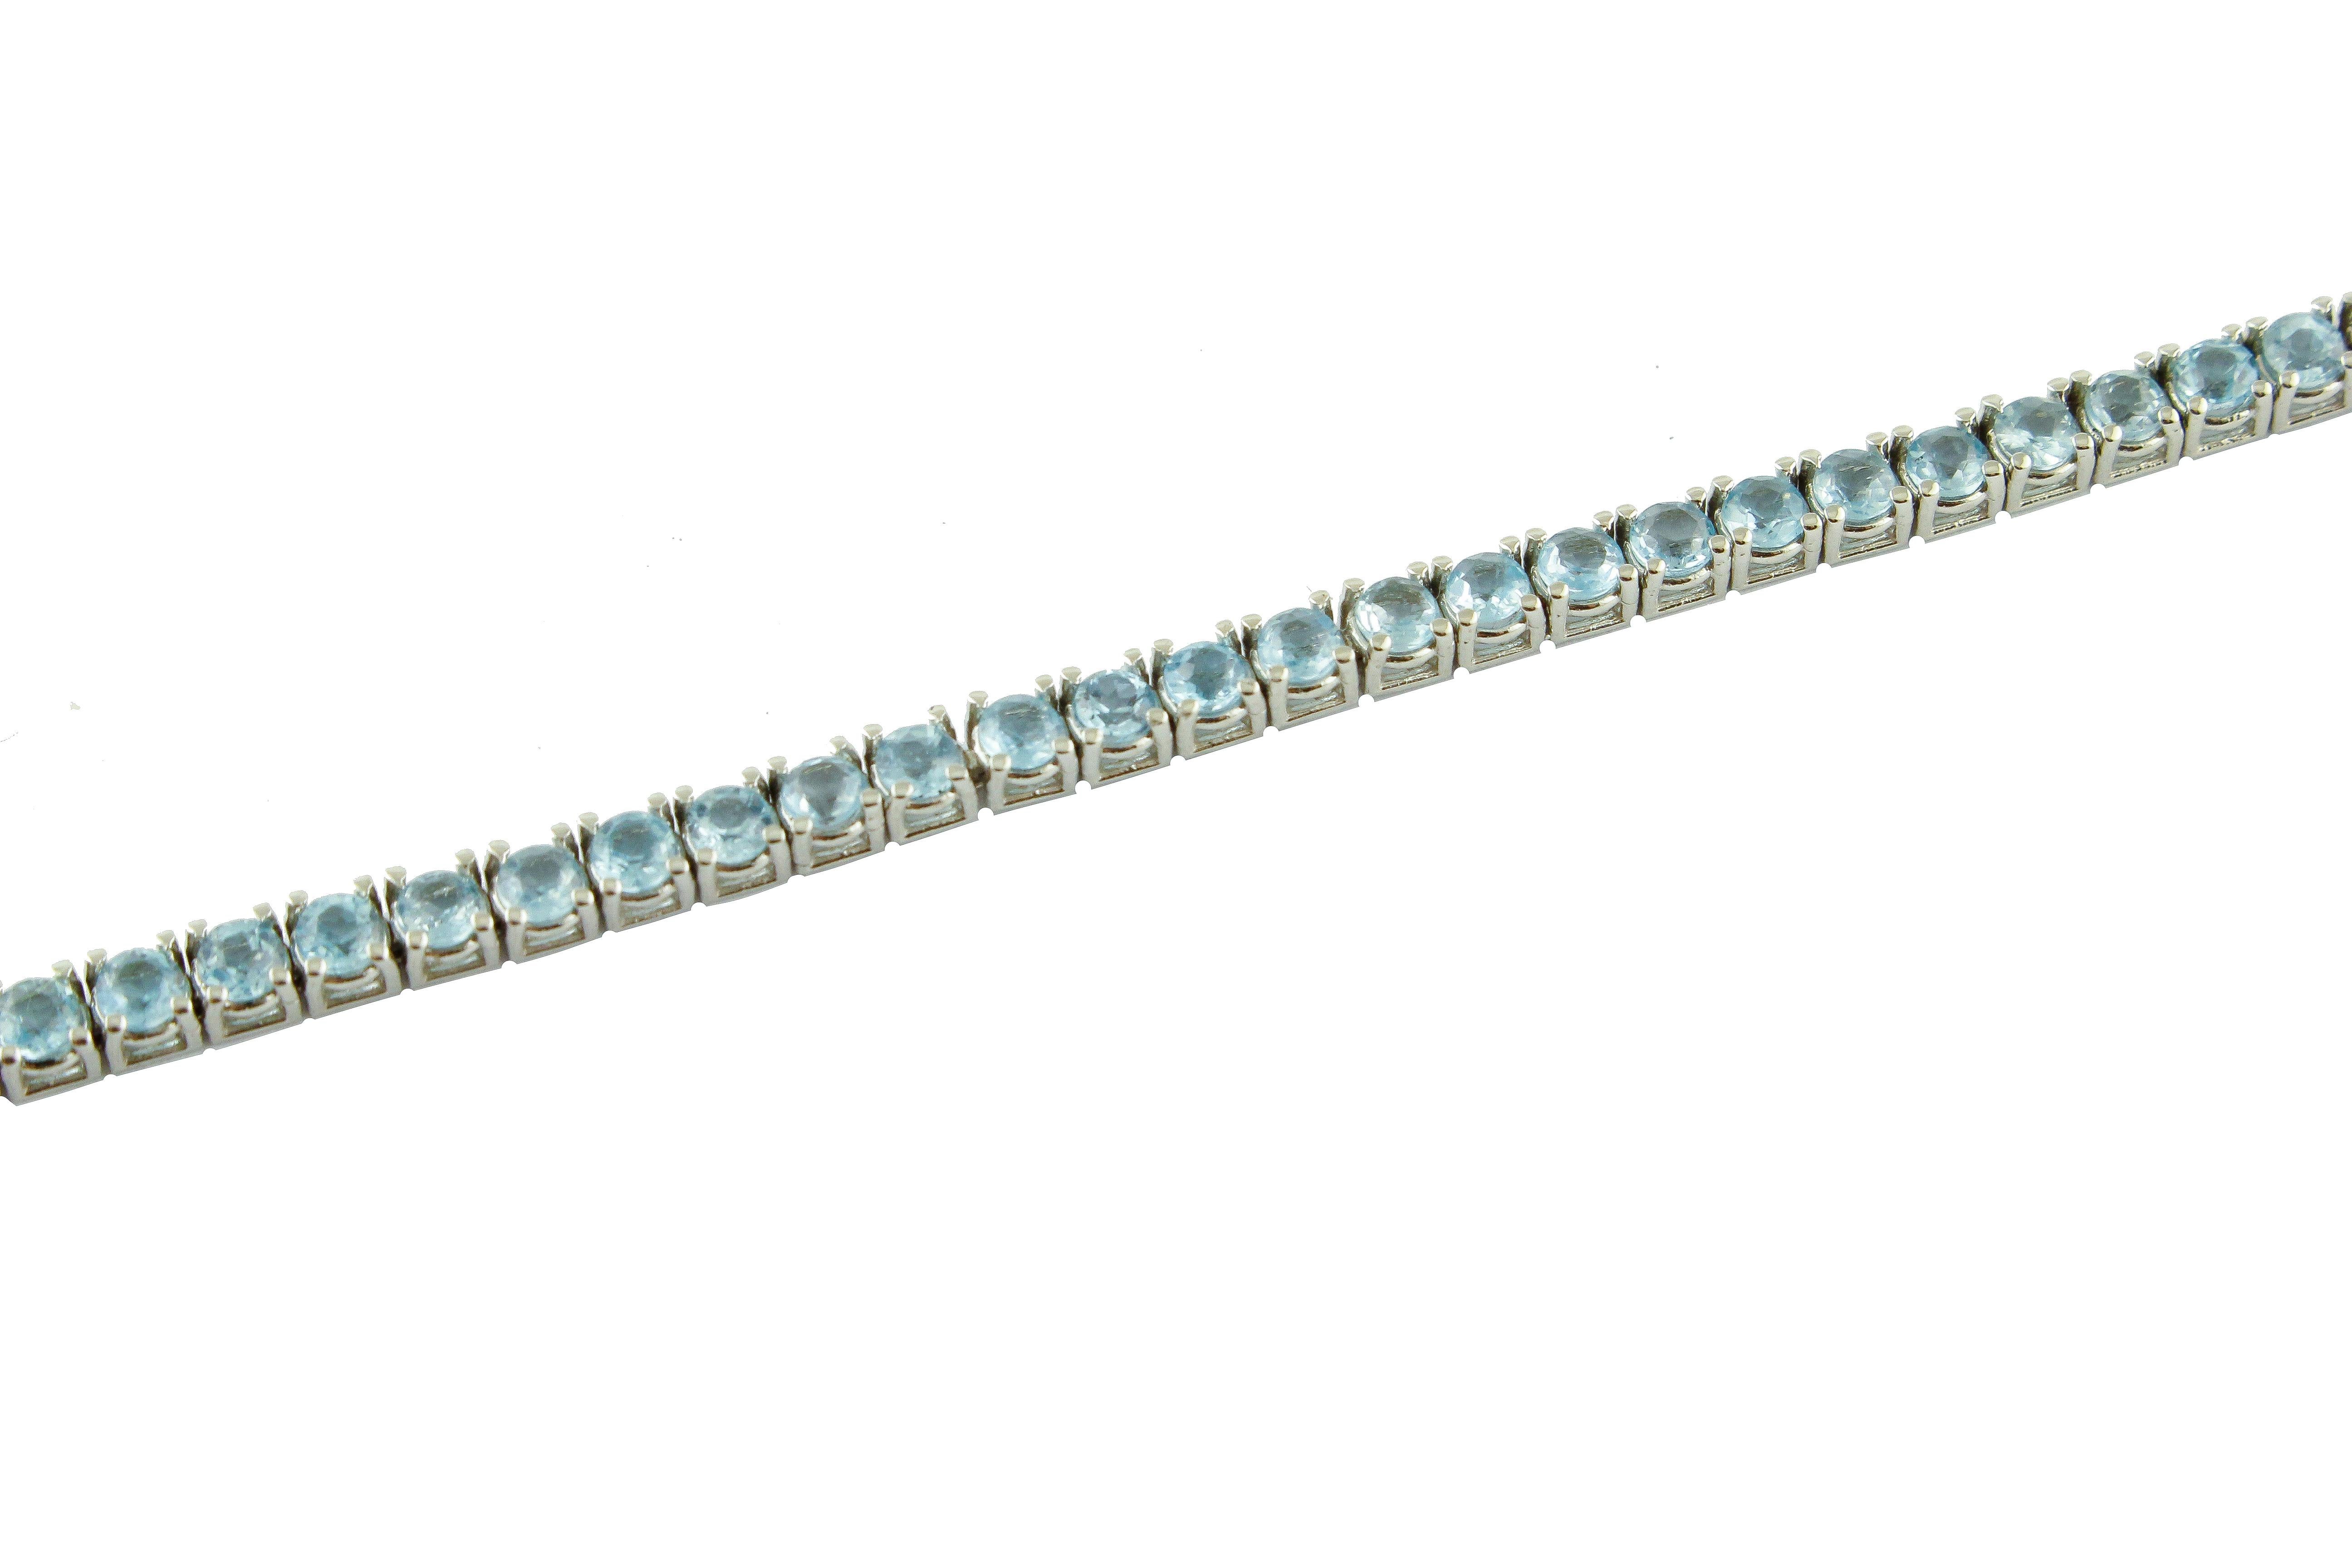 Wonderful tennis bracelet in 14K white gold mounted with fabulous aquamarines
Aquamarine 6 ct 
Total Weight 8.40 g 
R.F + gief
Length 18 cm 
